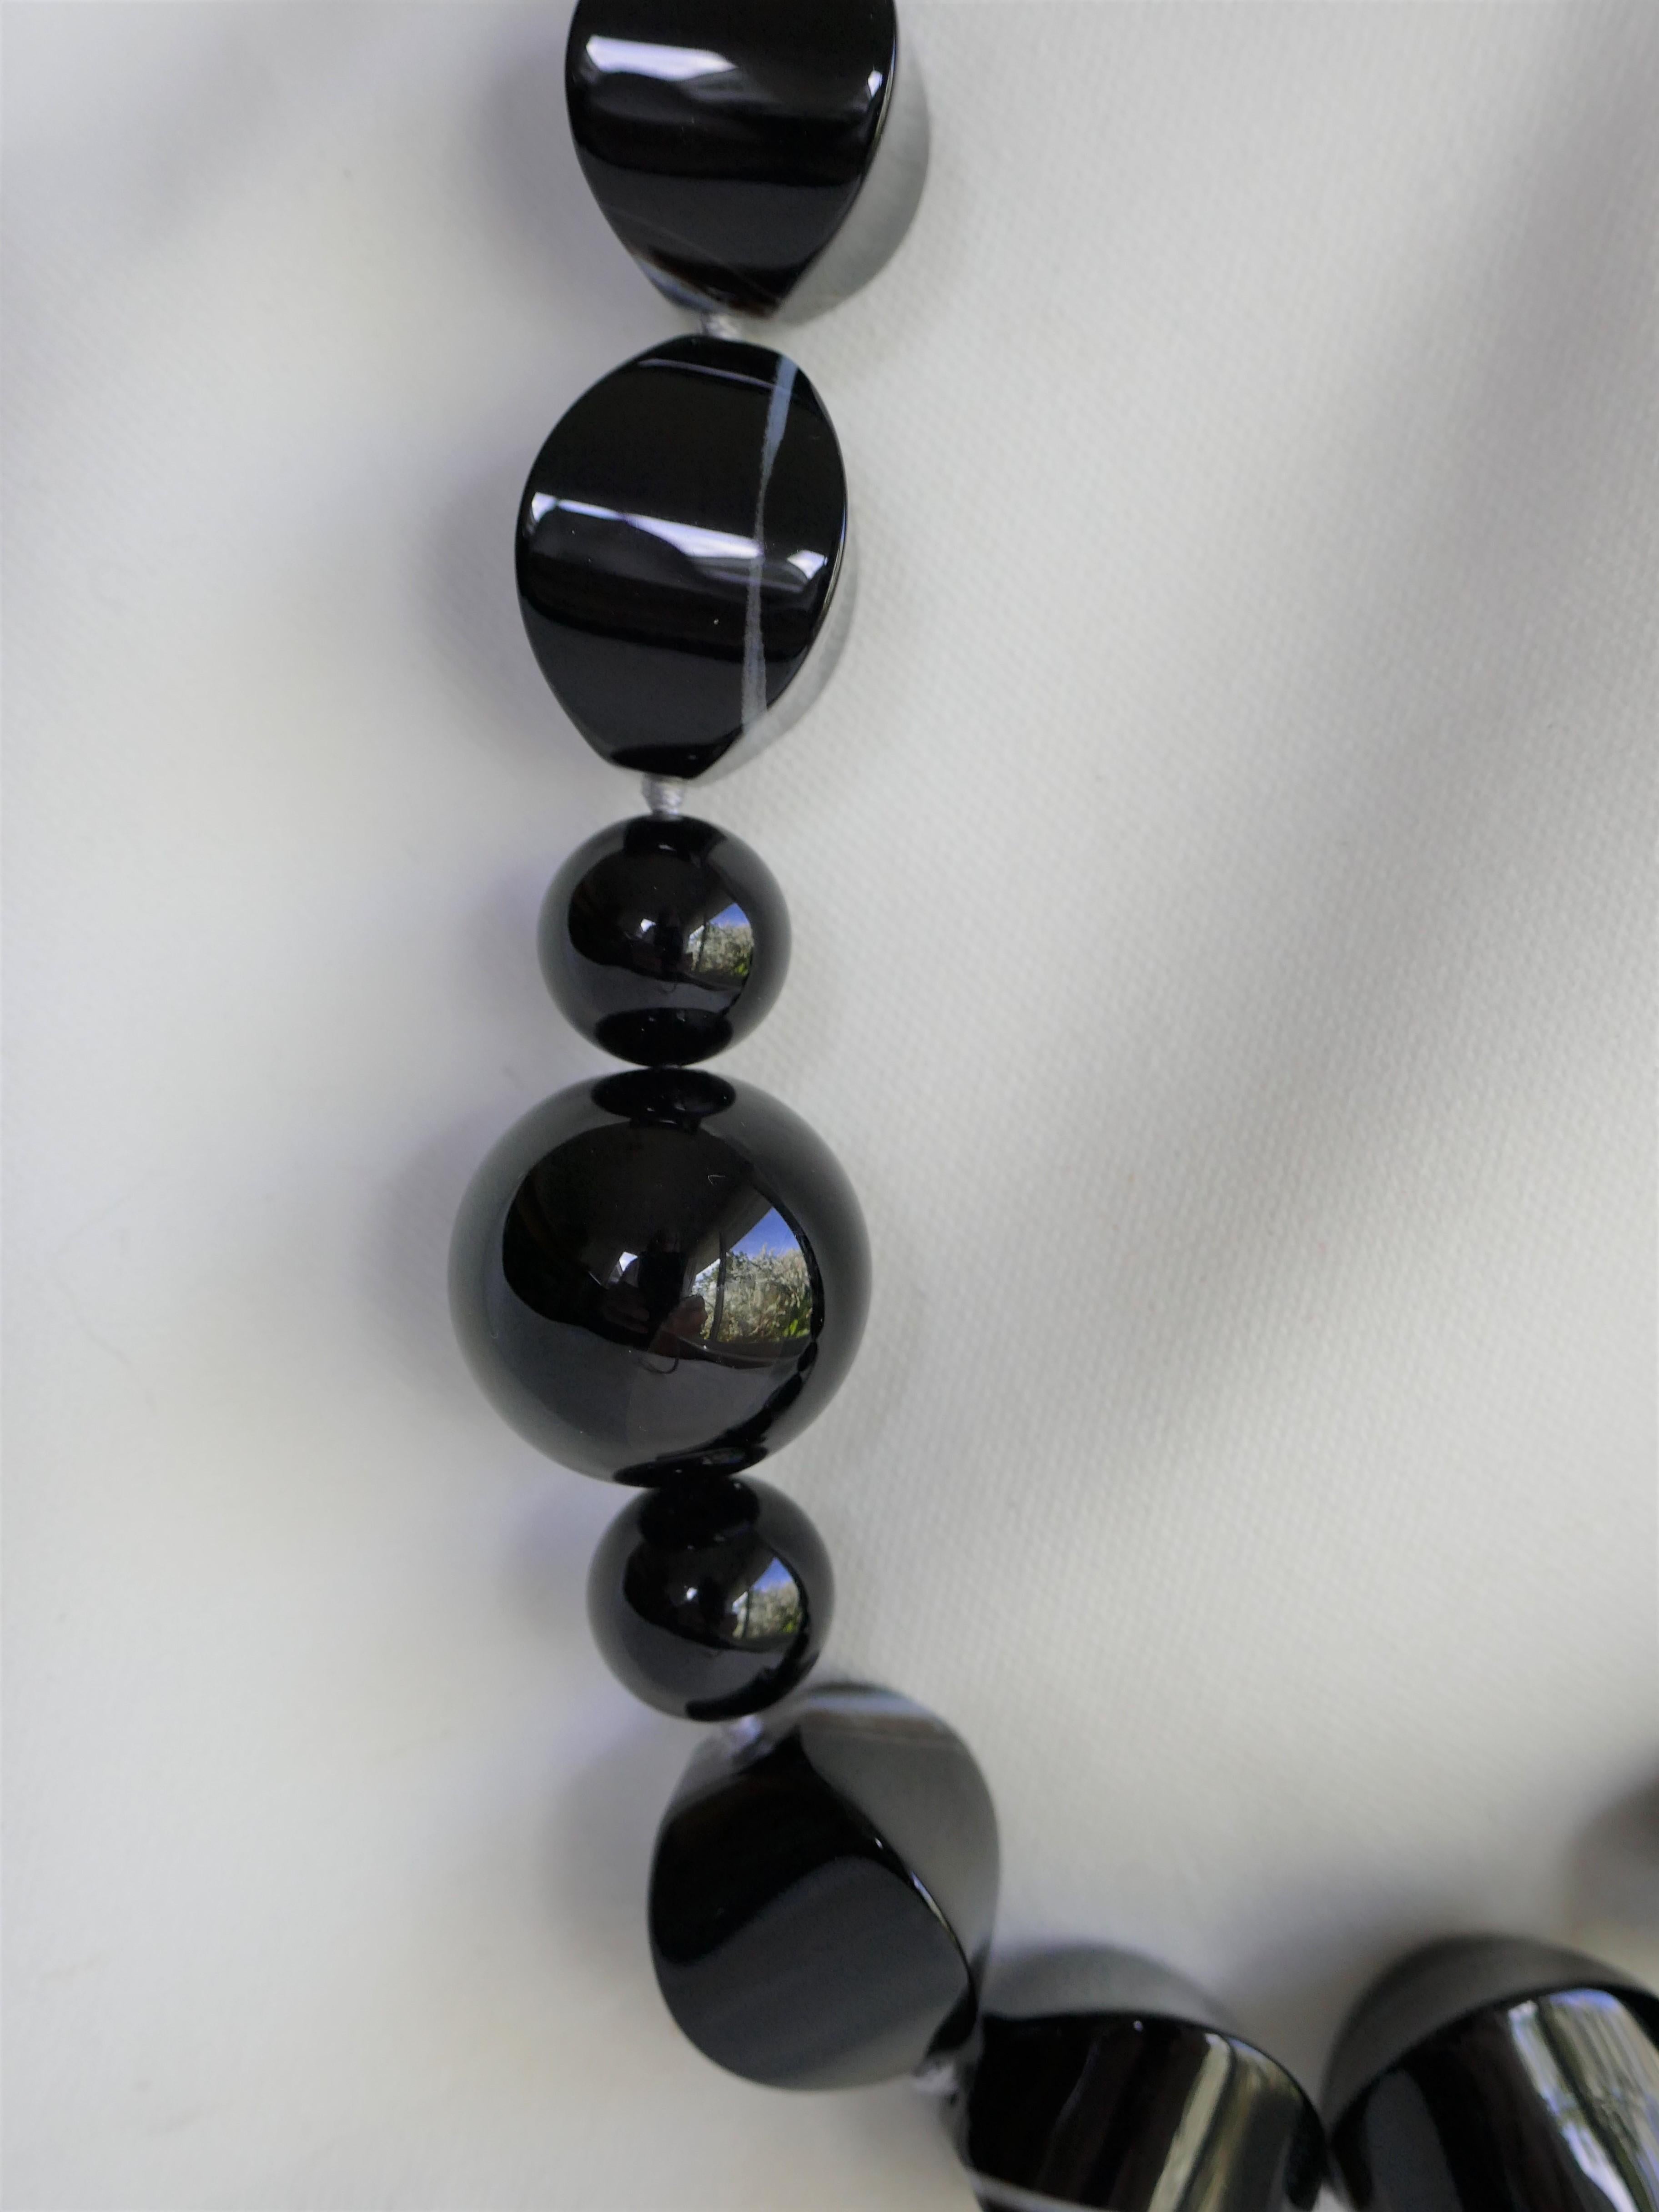 This necklace combines banded agate with 4 sizes of black onyx 12, 14. 20 & 22mm. The play with the shapes makes the necklace quite interesting. The necklace is very neutral and easy to wear. It is a classic, modern and a statement necklace.  It is